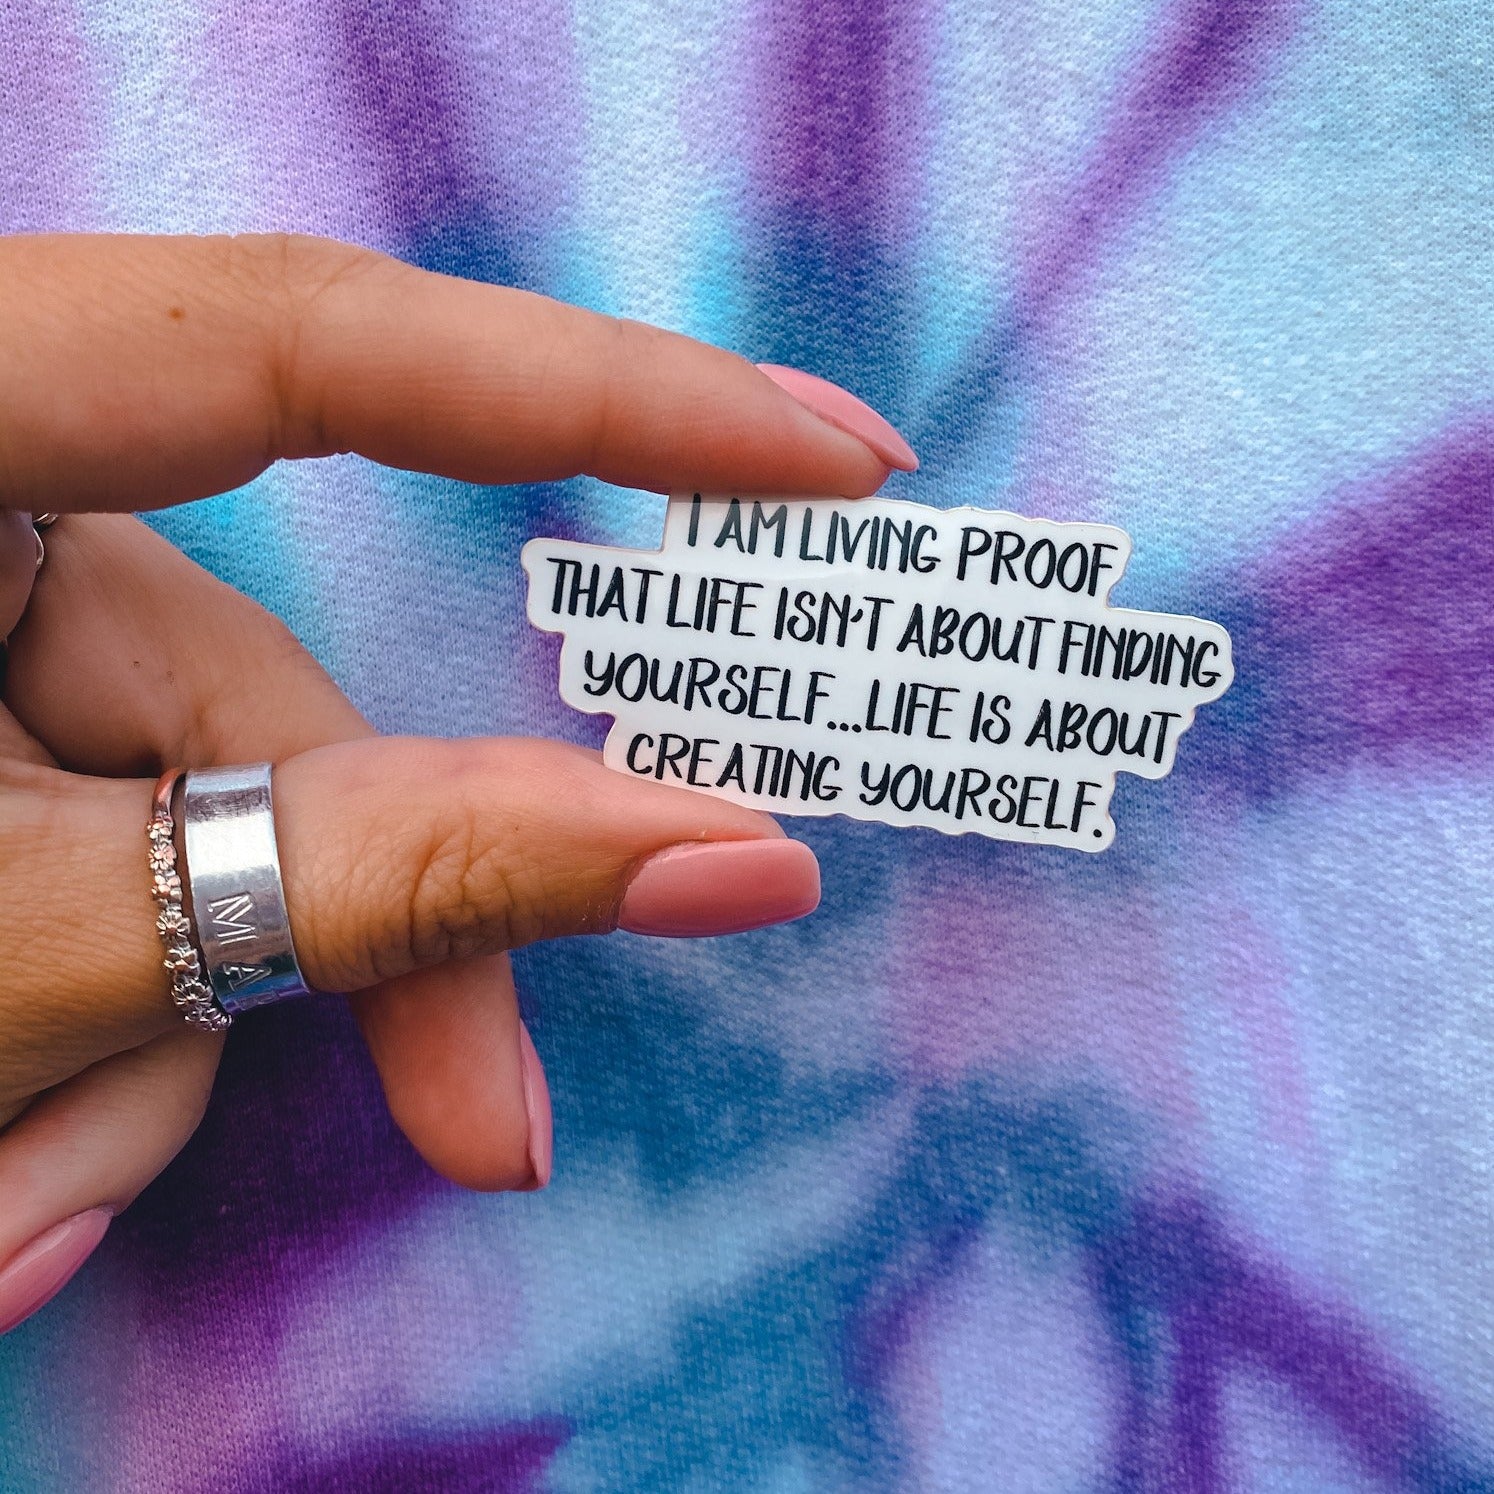 STICKER- "Life is about creating yourself"